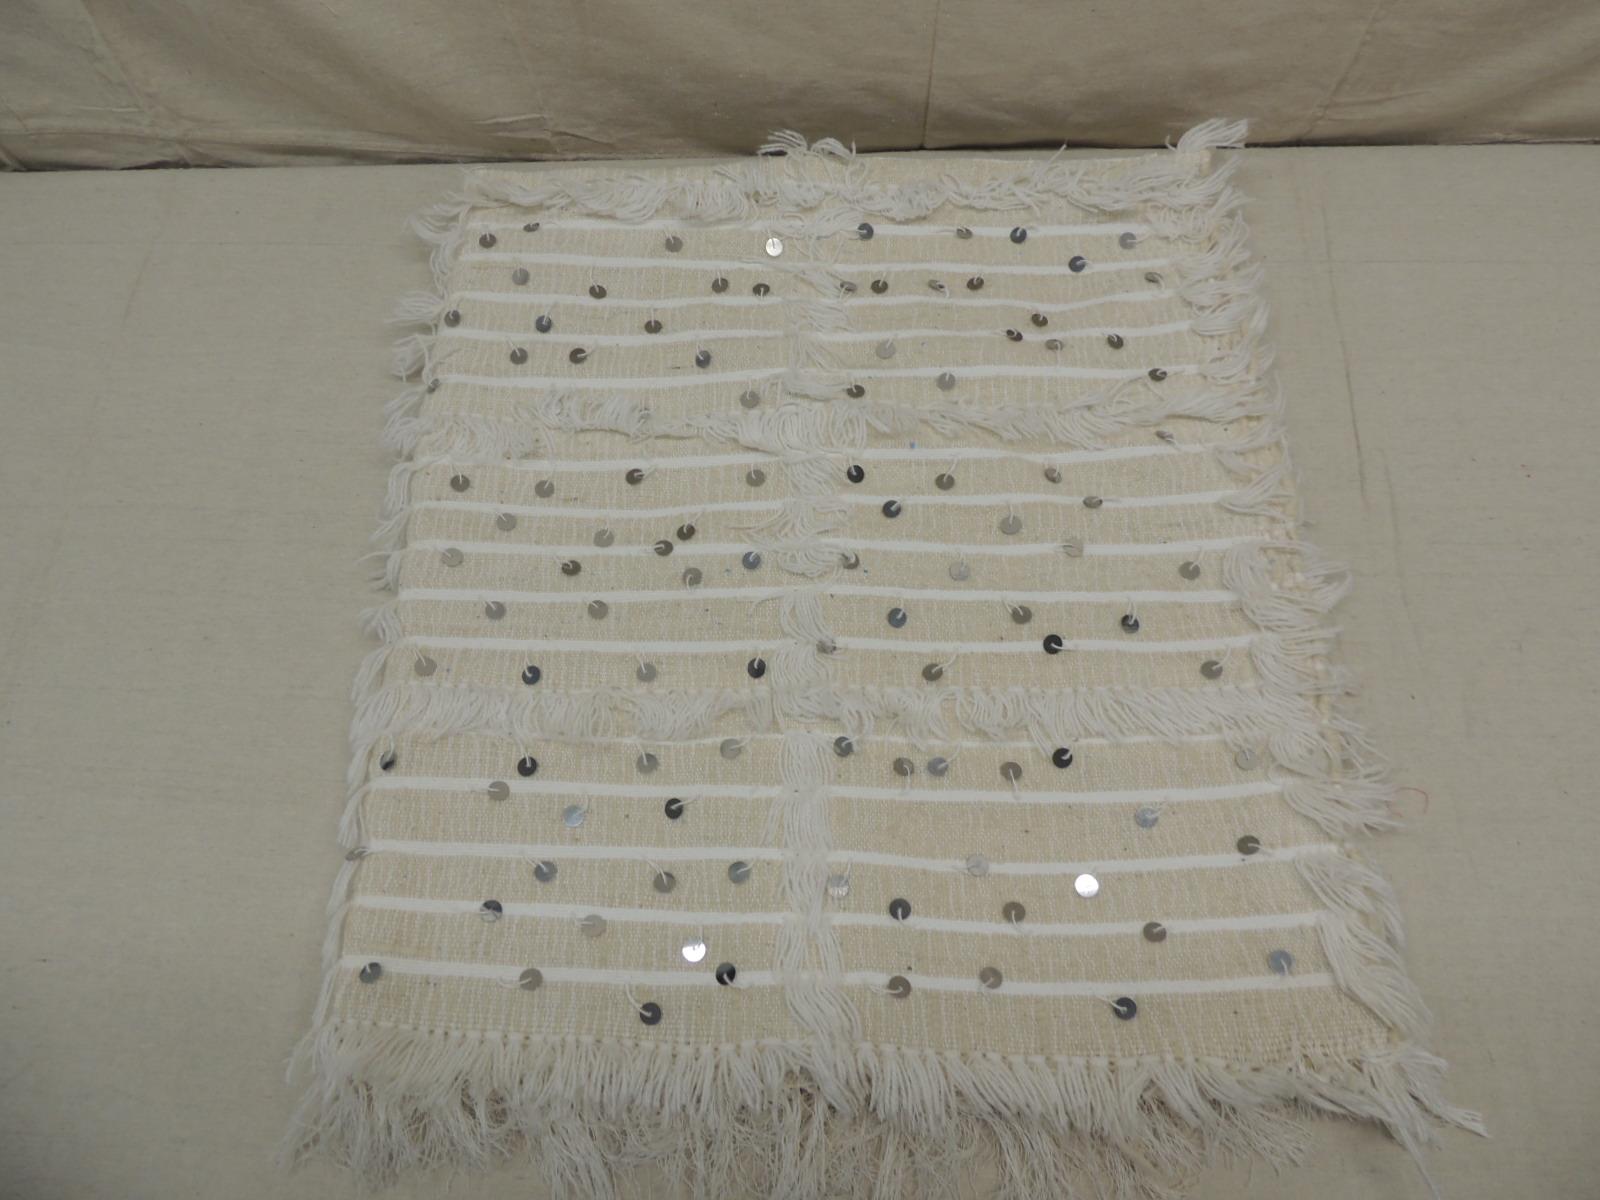 Moroccan beige and white wedding blanket or throw
beige field with white fringes and silver sequins.
Size: 44